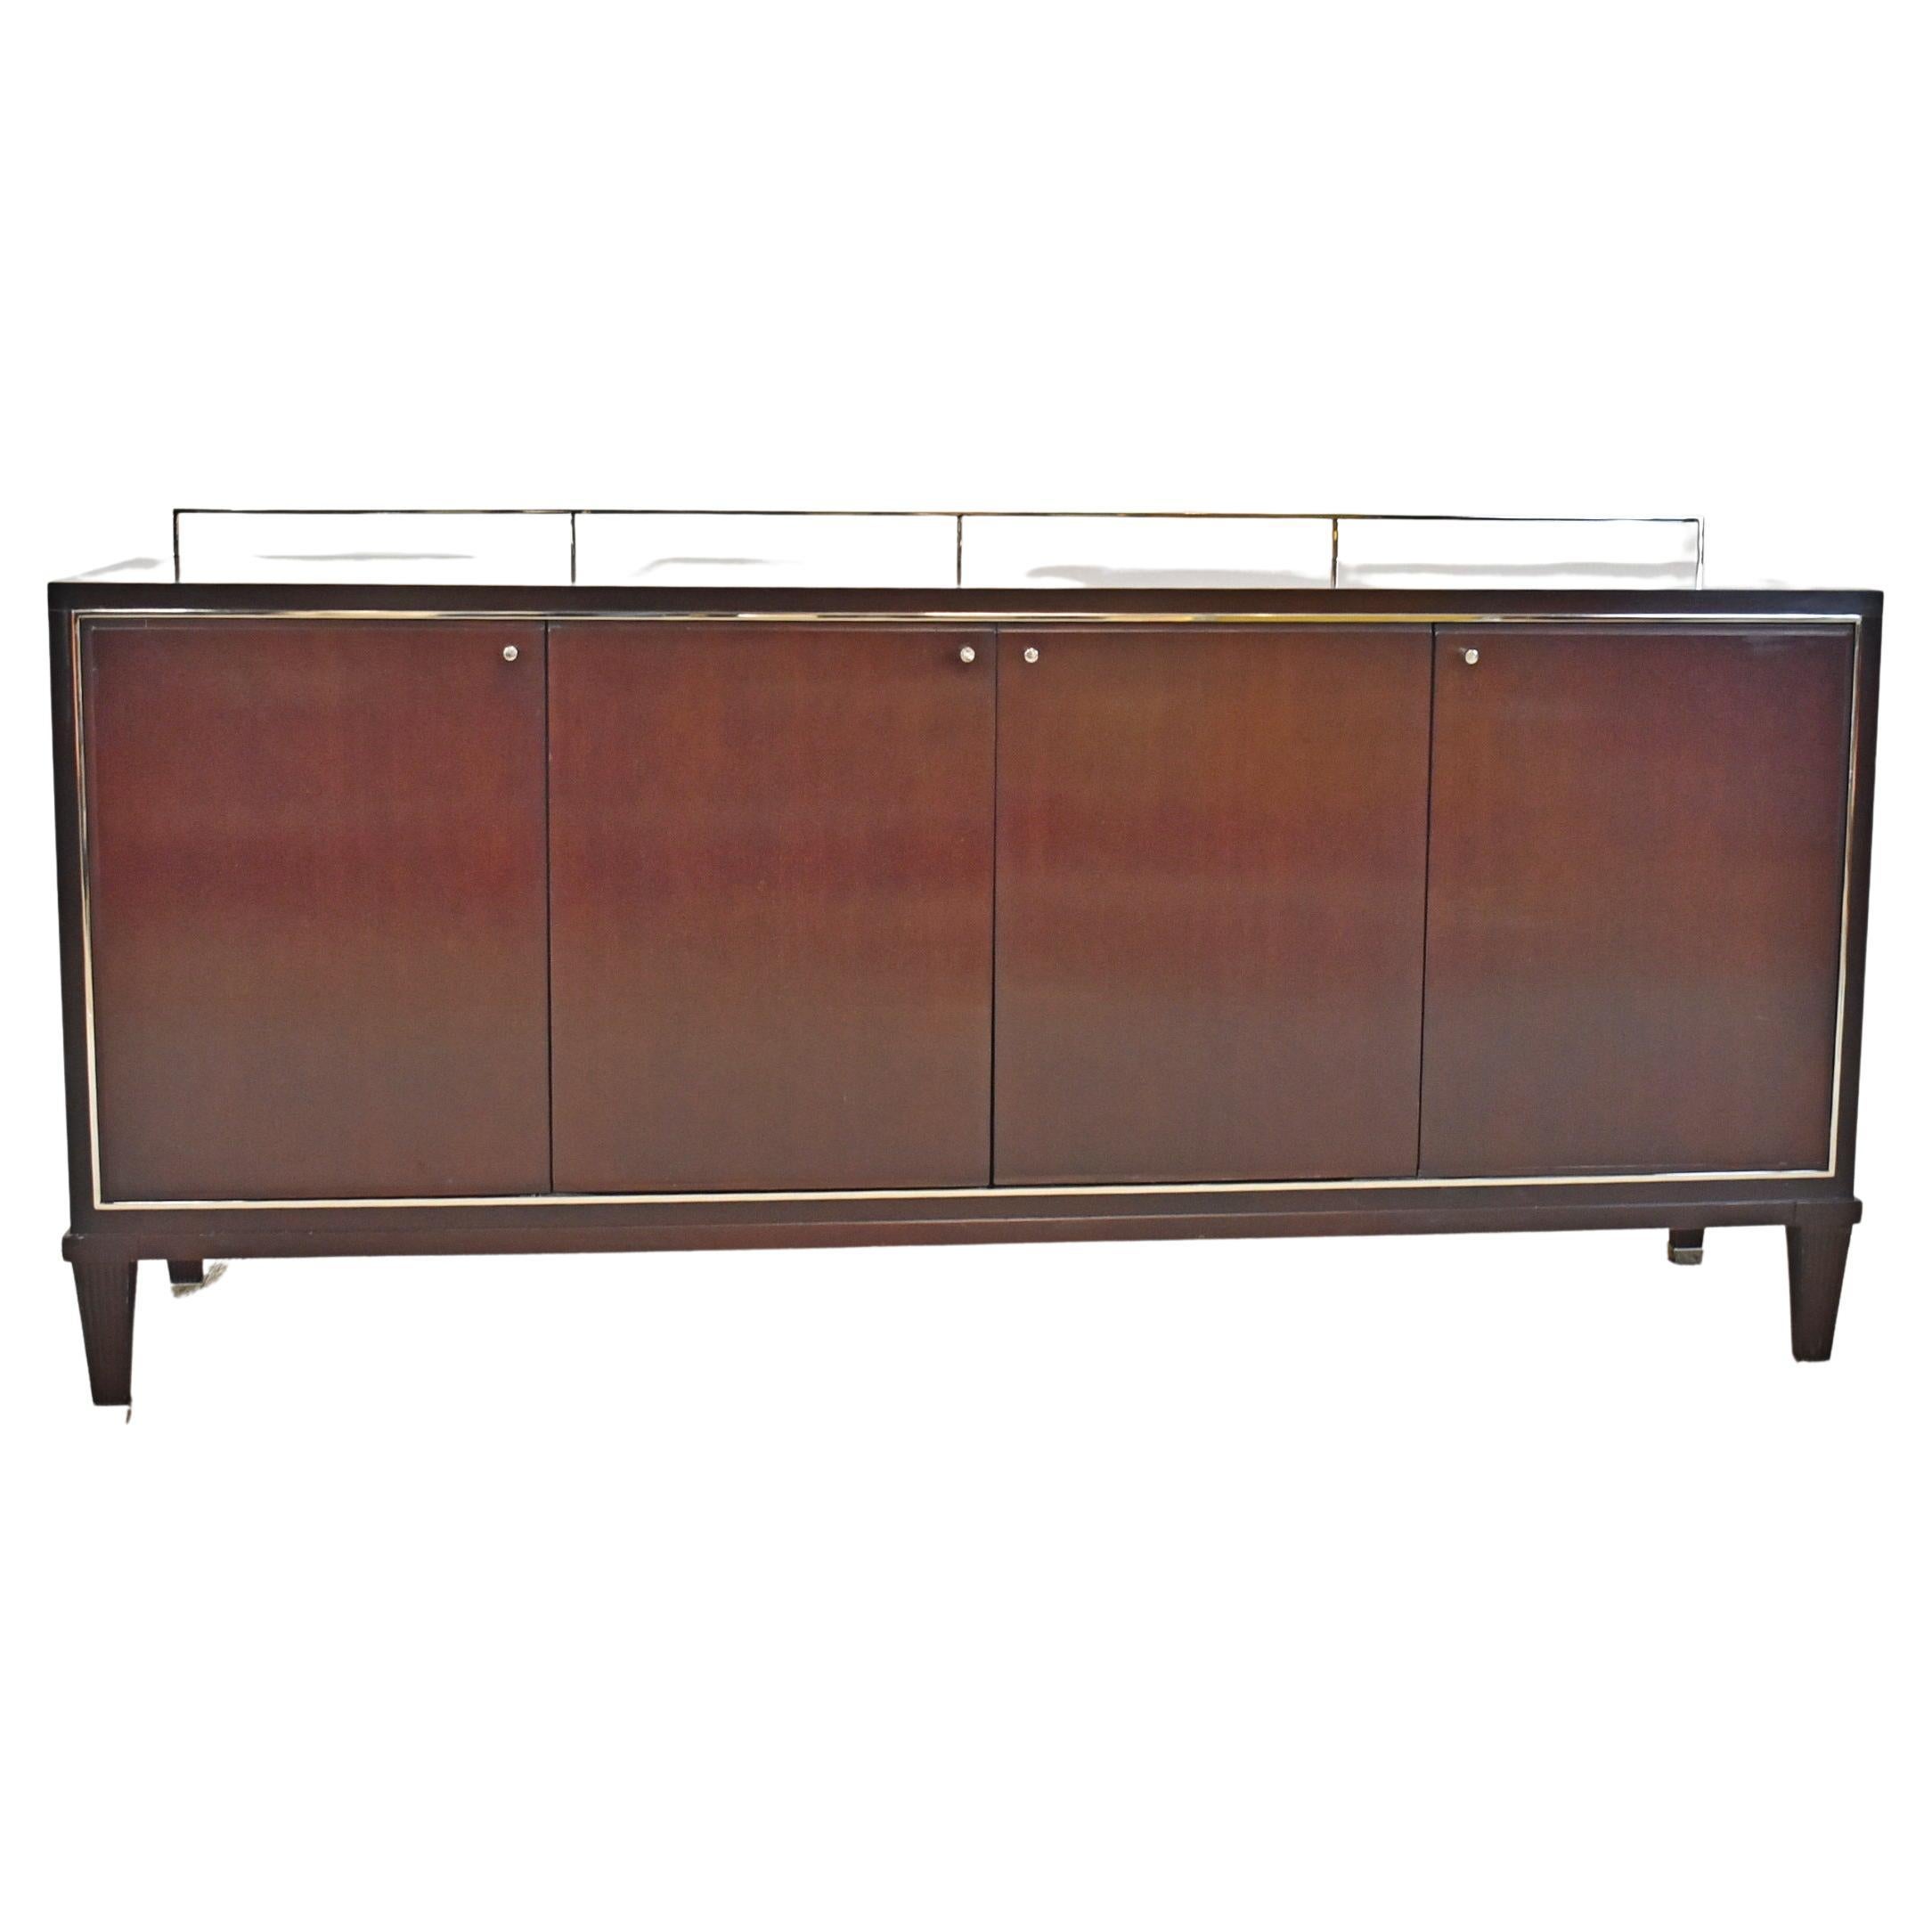 Barbara Barry Collection for Baker Furniture a 4 Door Mahogany Credenza For Sale